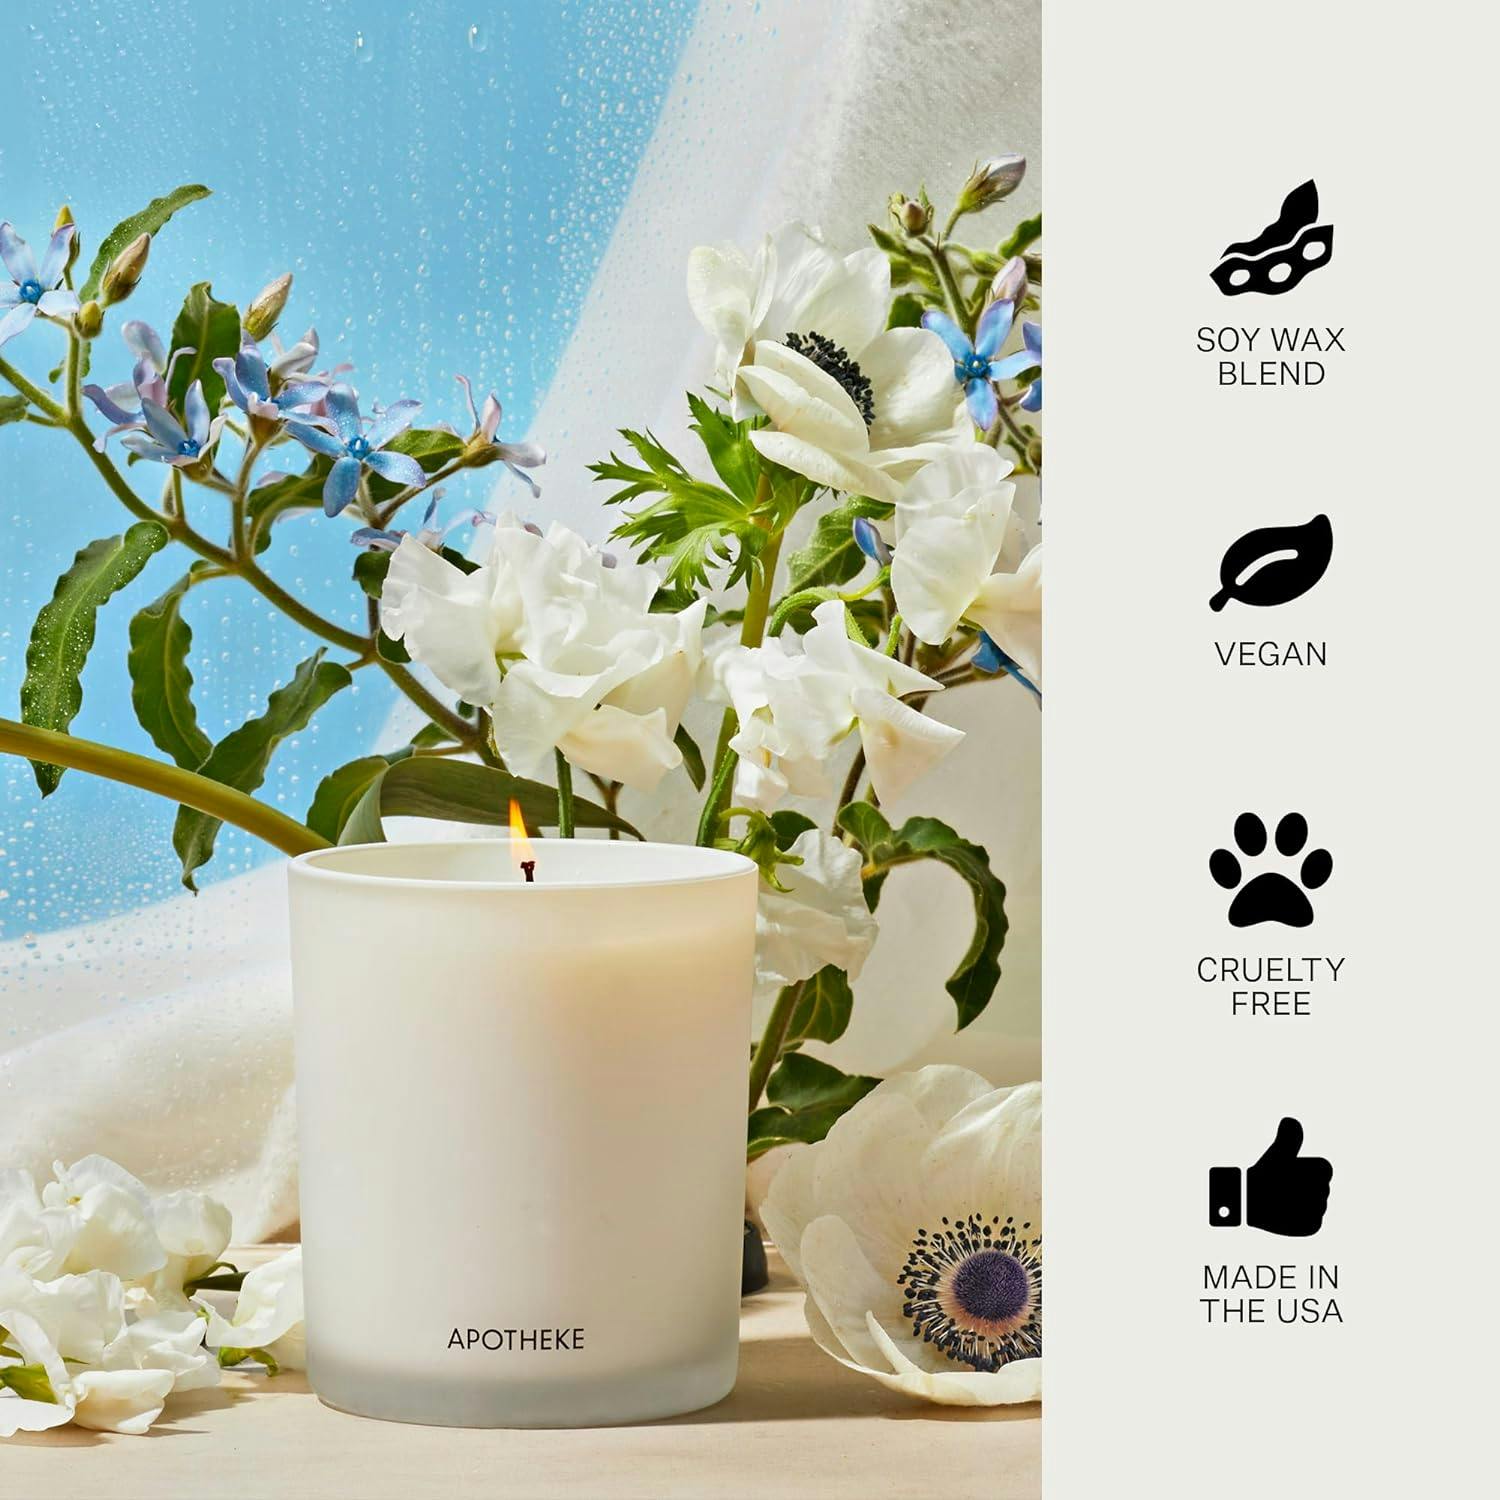 Crisp Linen and White Musk Soy Wax Scented Candle